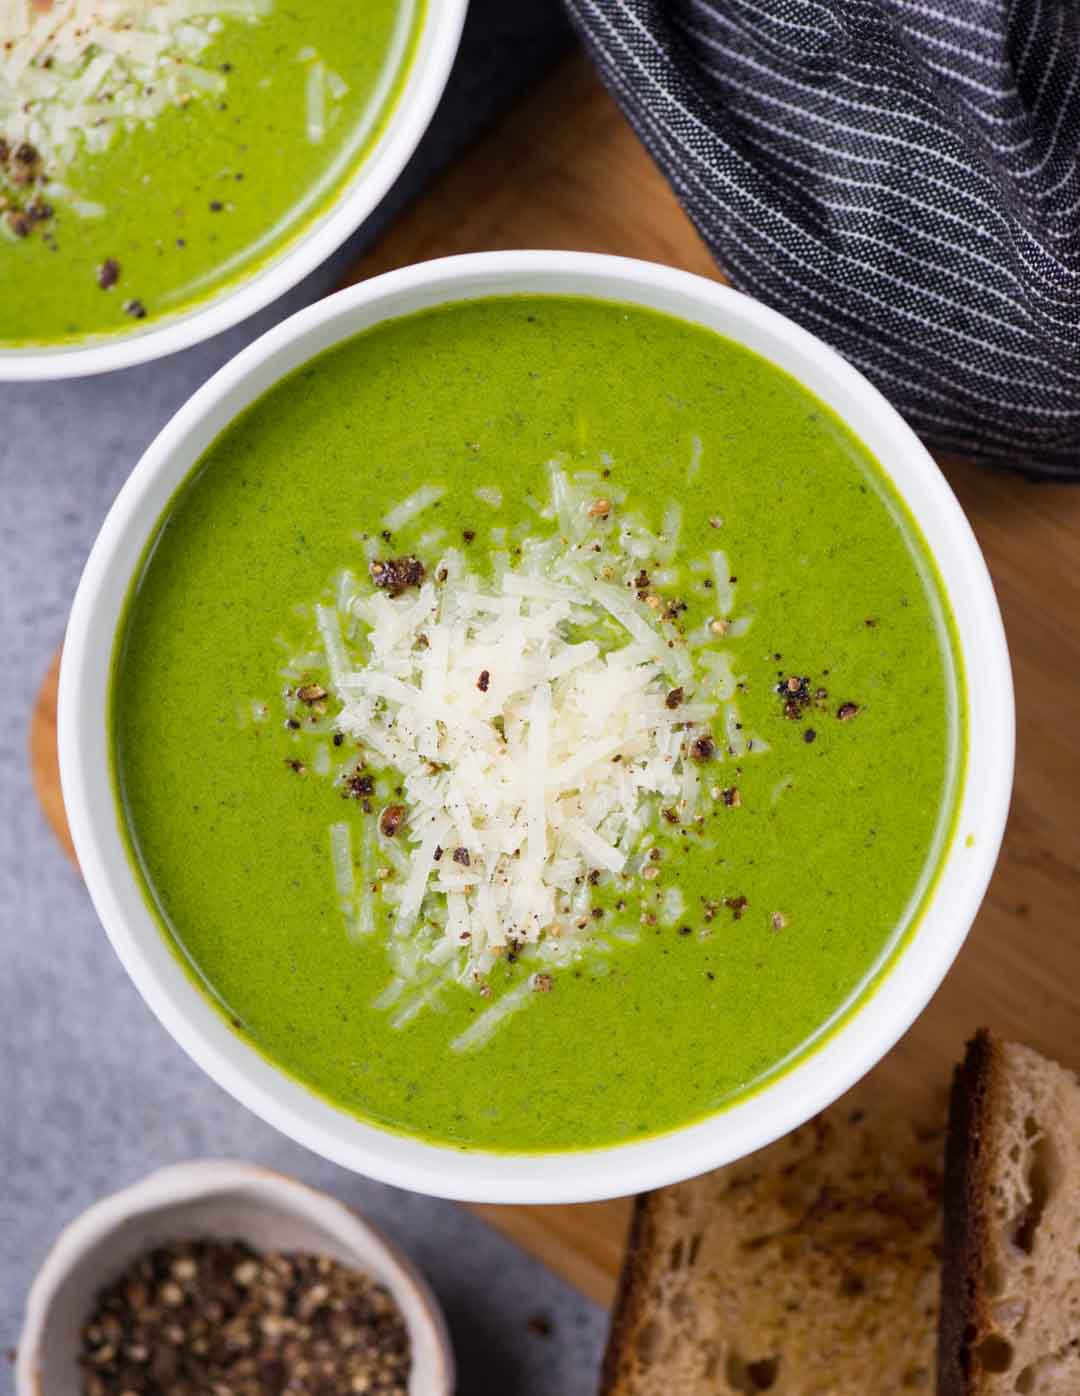 Luxuriously Creamy Spinach Soup is delicious and loaded with the goodness of spinach. There is only Spinach in here, thickened with cream cheese and it has a good dose of freshly cracked black pepper.